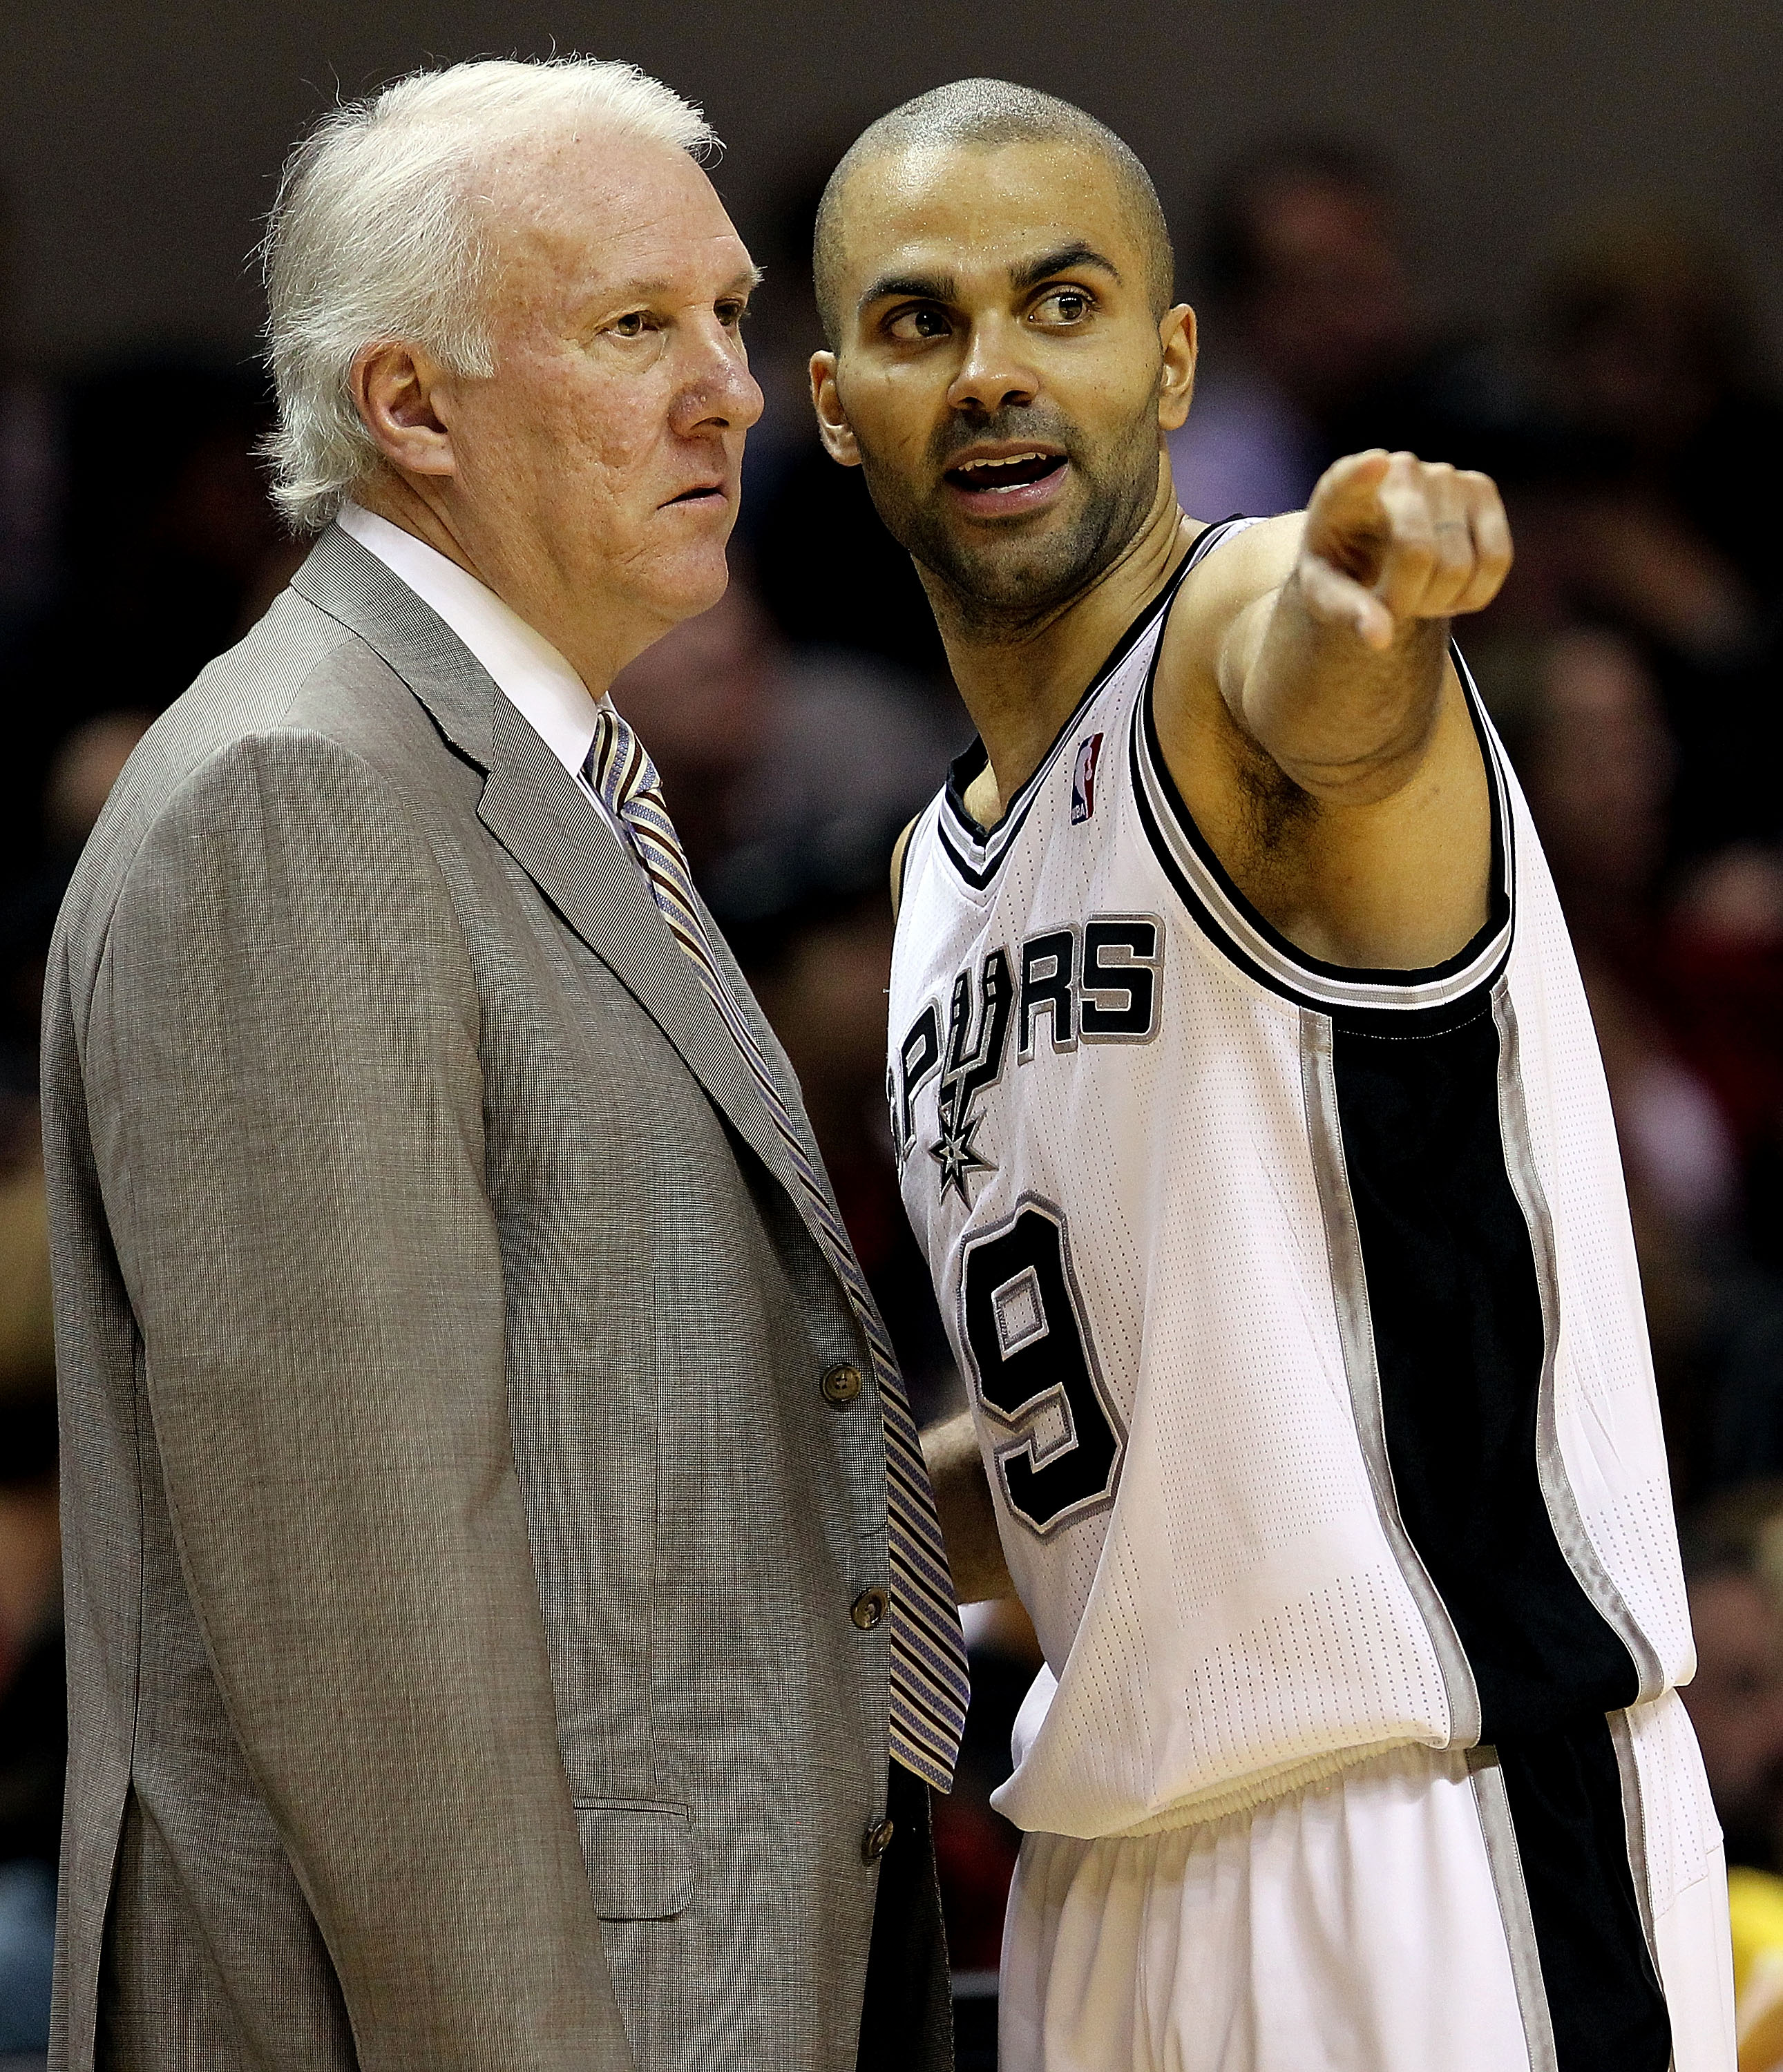 SAN ANTONIO, TX - DECEMBER 28:  Guard Tony Parker #9 of the San Antonio Spurs with Gregg Popovich during play against the Los Angeles Lakers at AT&T Center on December 28, 2010 in San Antonio, Texas.  NOTE TO USER: User expressly acknowledges and agrees t